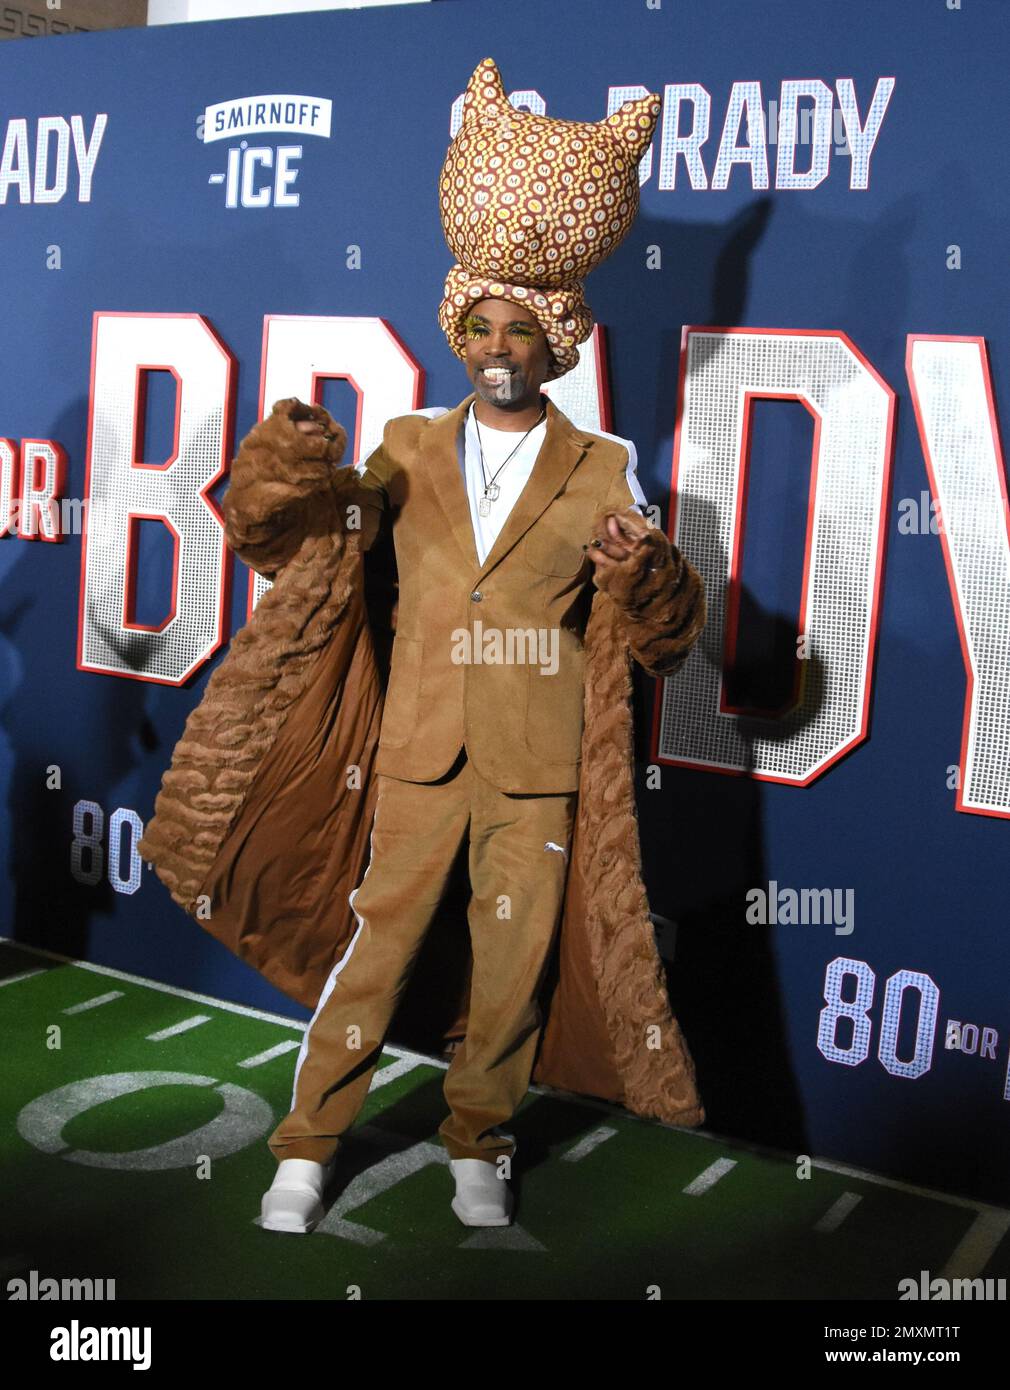 Los Angeles, California, USA 31st January 2023 Actor  Billy Porter and Football Player Tom Brady attend the Los Angeles Premiere Screening of Paramount Pictures' '80 for Brady' at Regency Village Theatre on January 31, 2023 in Los Angeles, California, USA. Photo by Barry King/Alamy Stock Photo Stock Photo